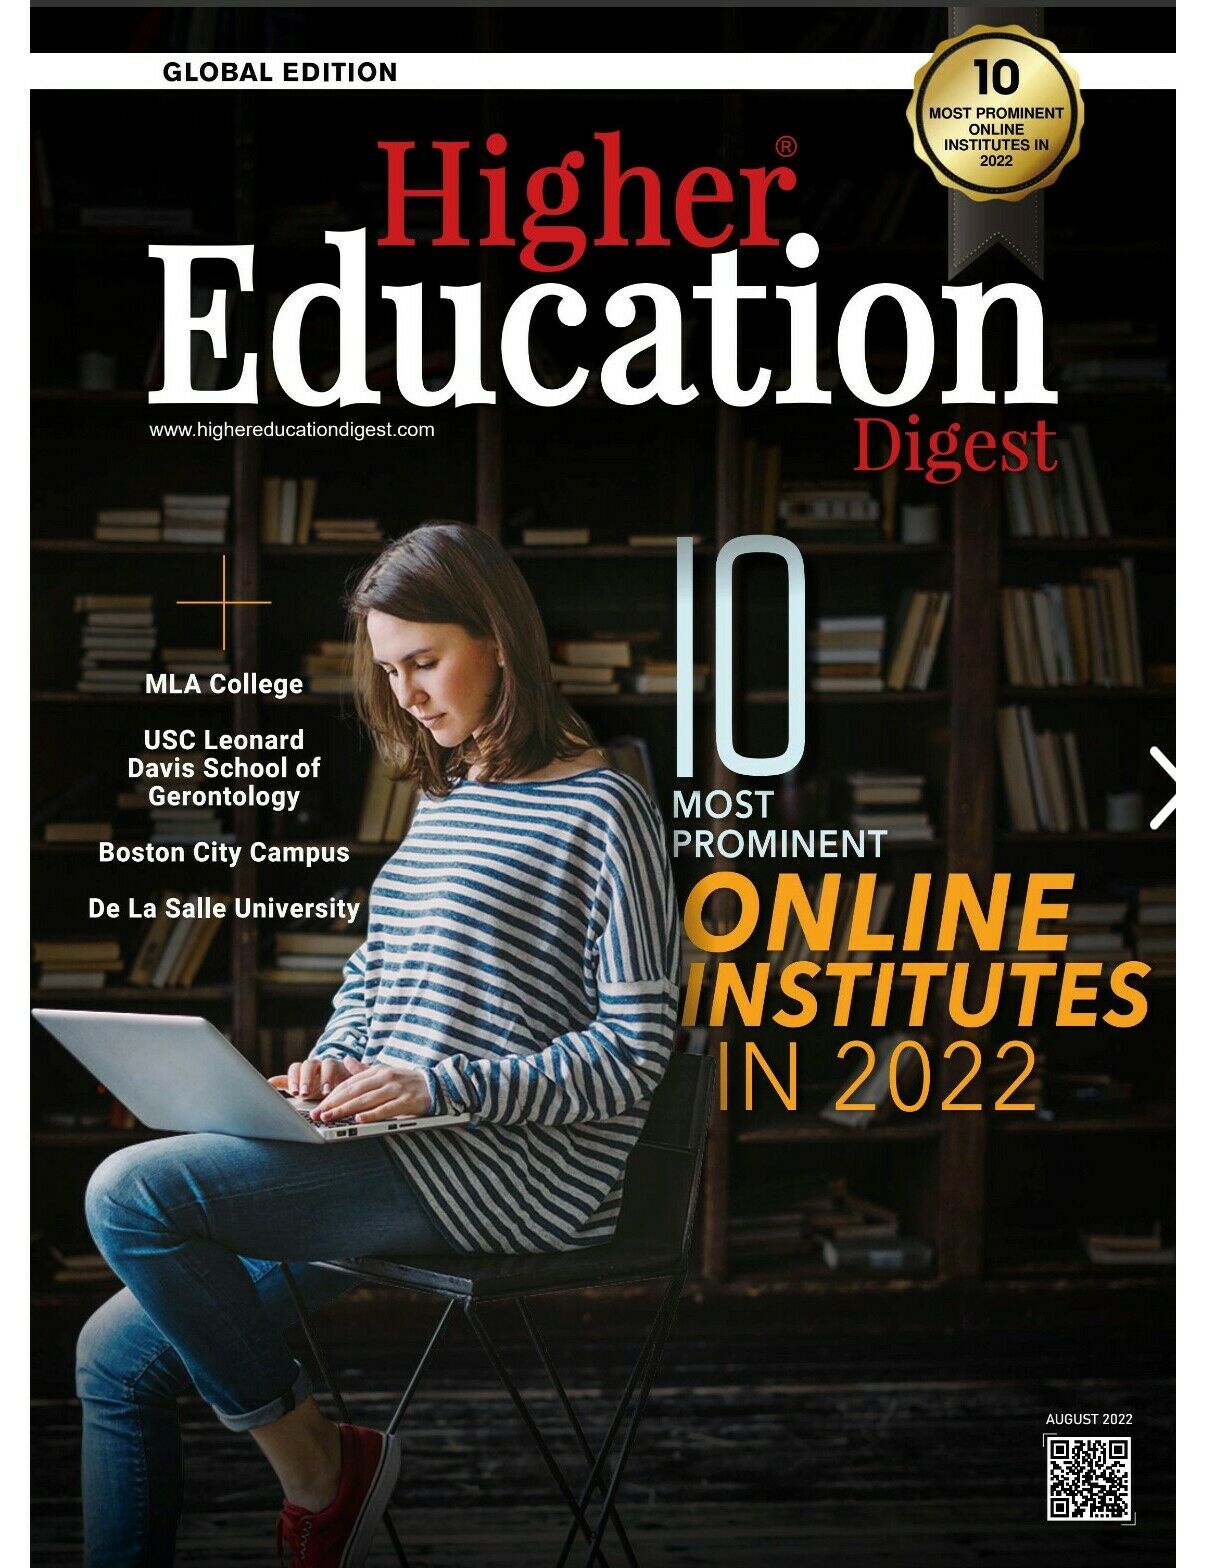 MLA College Recognised as Top Online Institution in 2022.